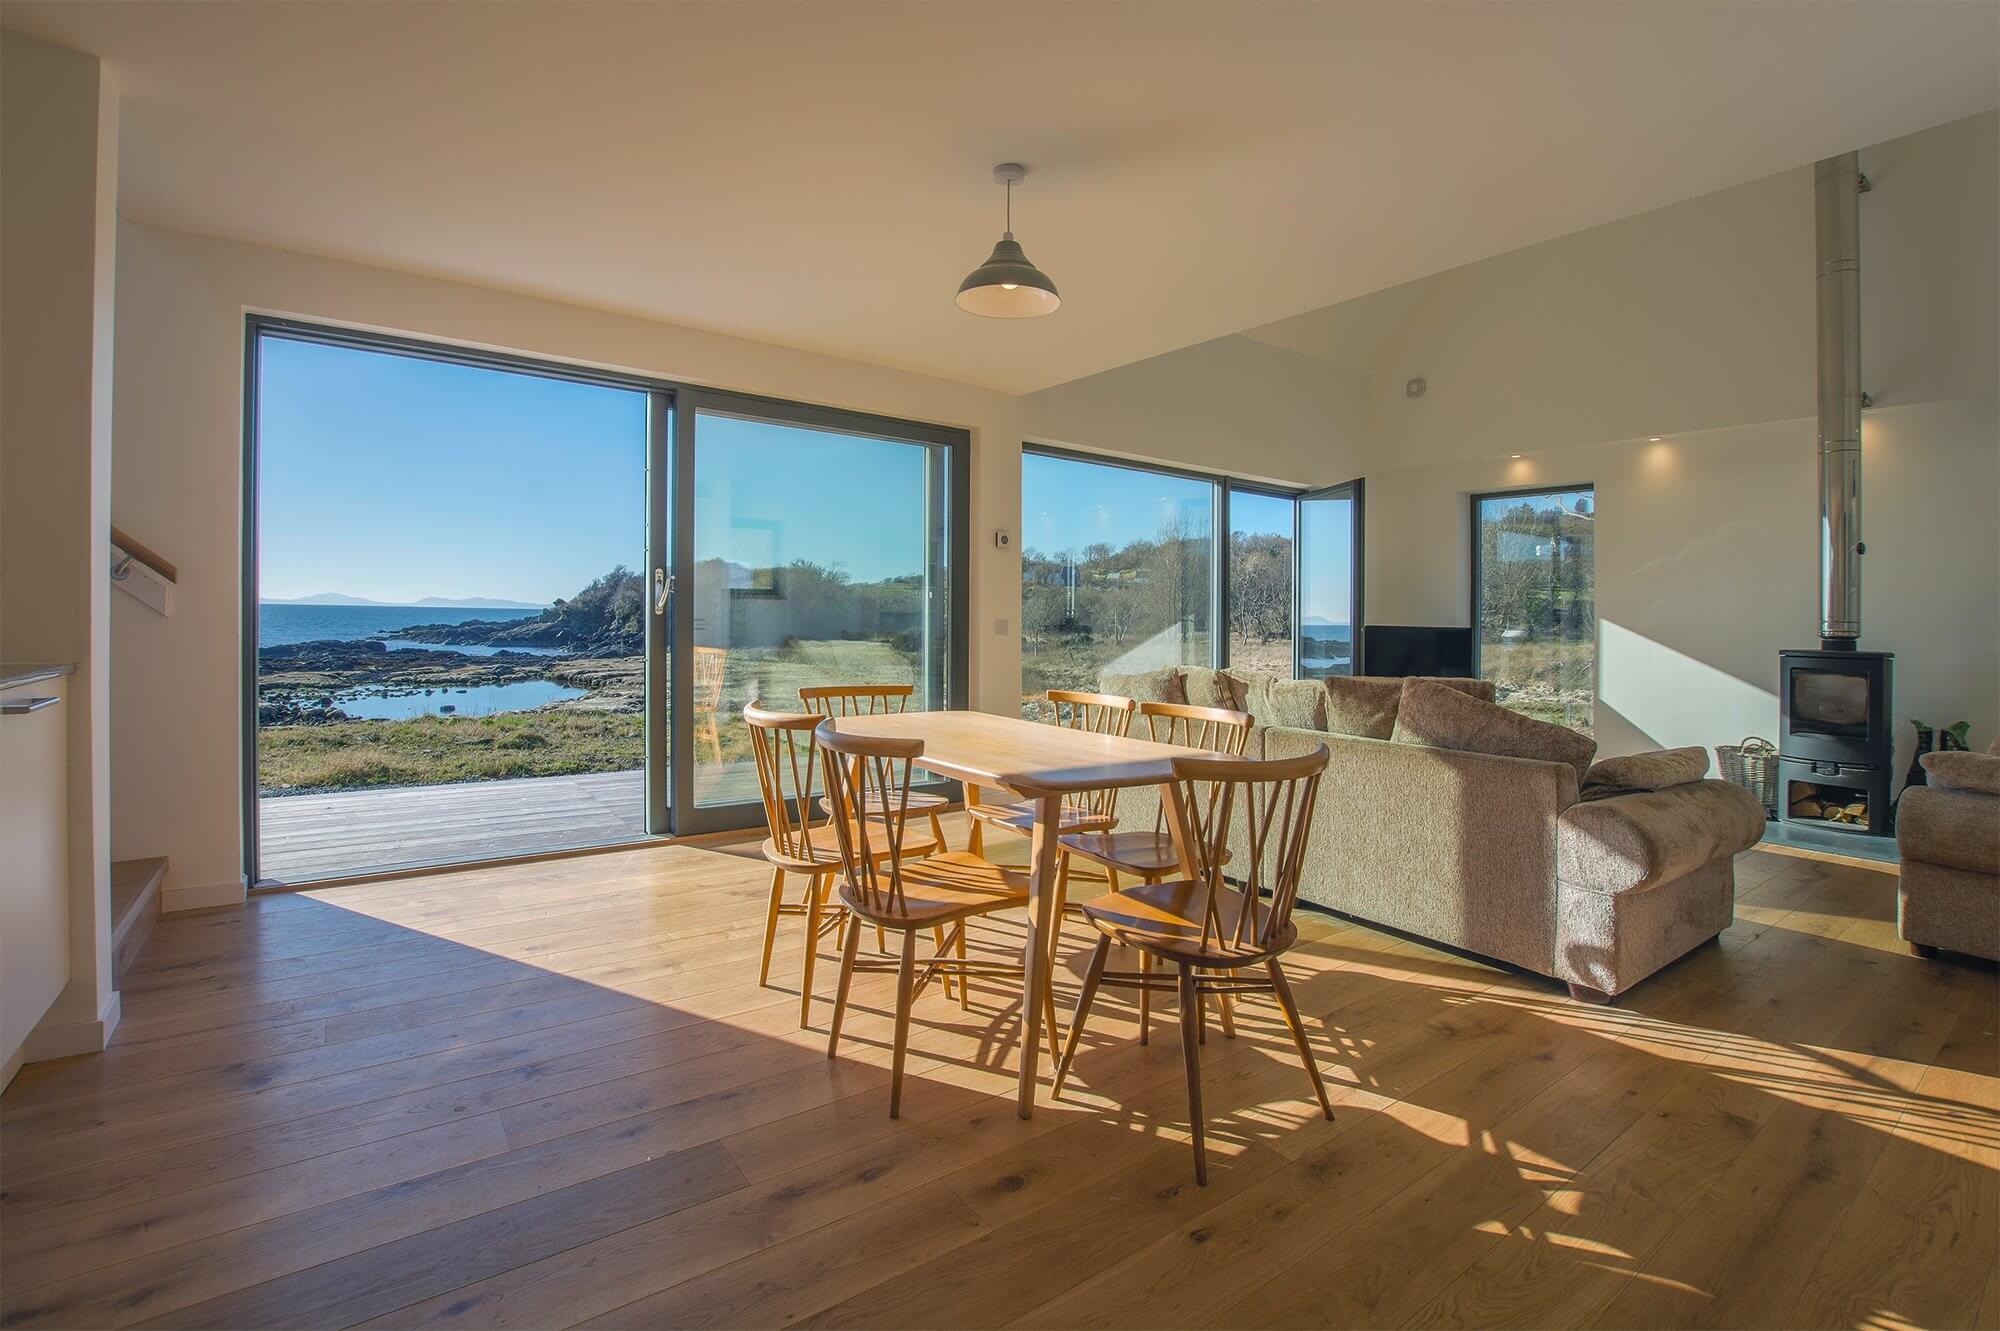 Open plan dining-living with sliding doors and ample glazing overlooking the sea in Scotland's Isle of Skye